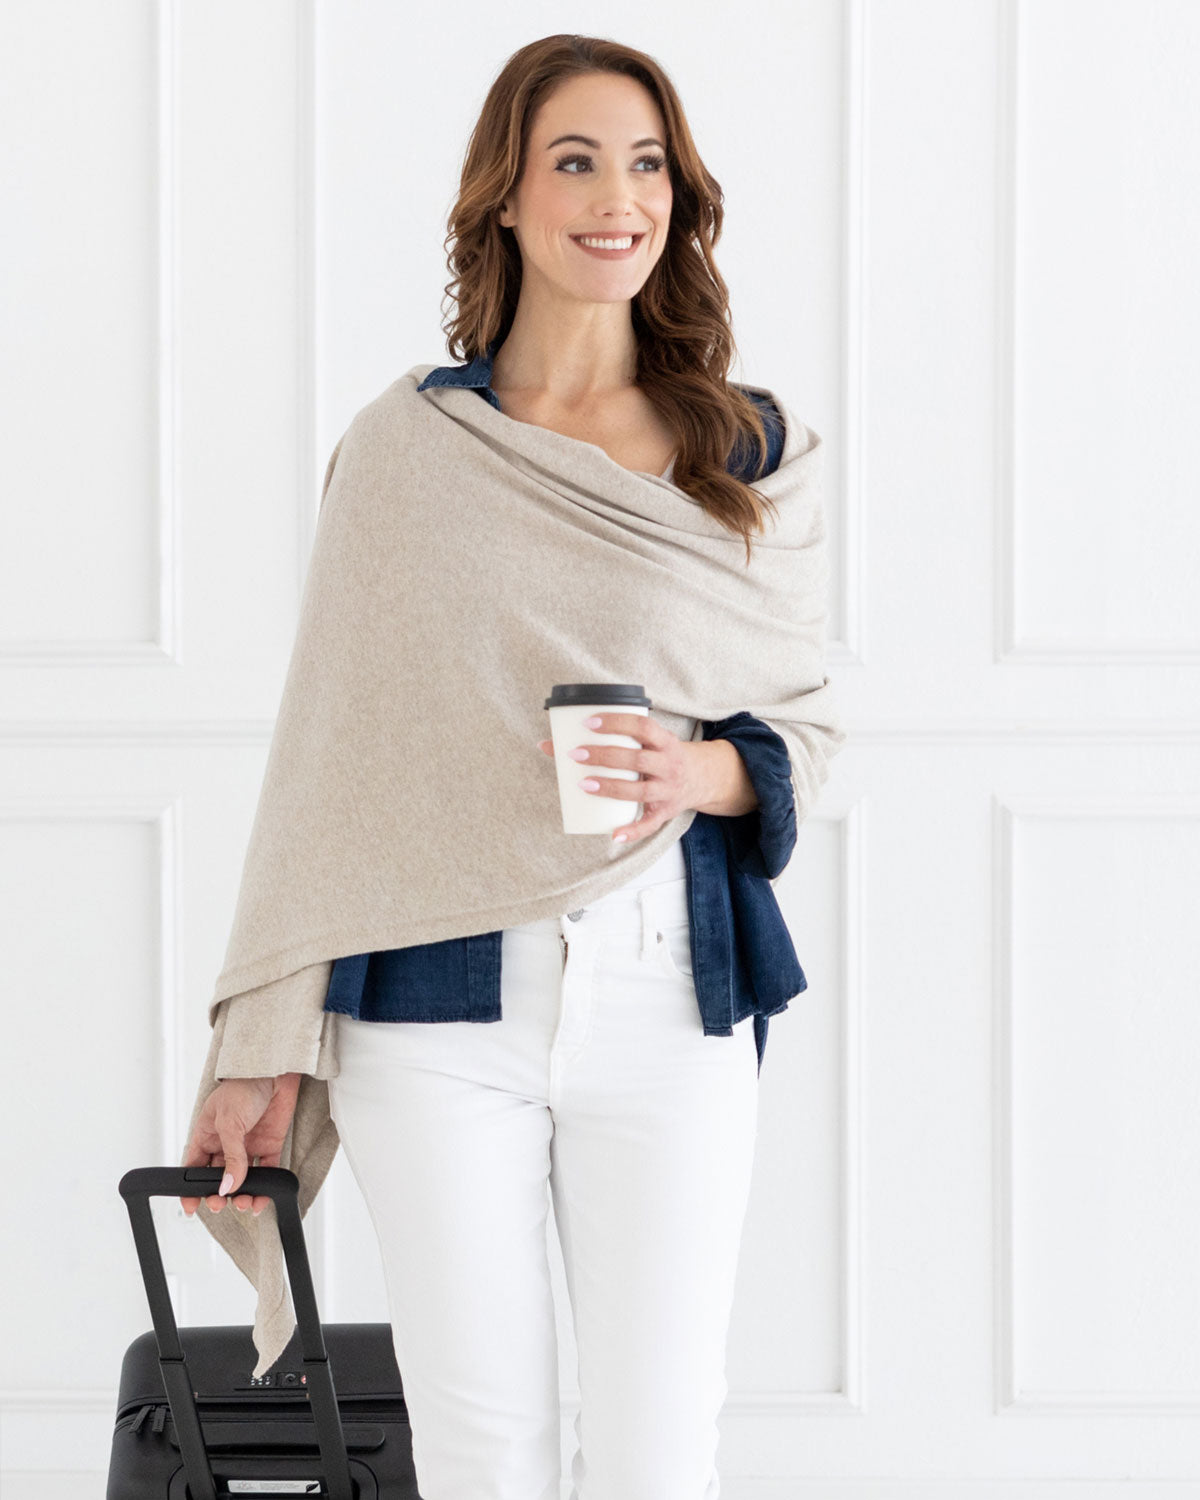 Woman wearing the Dreamsoft Travel Scarf in Birch Scarf which is a cream scarf, pulling a suitcase while holding her coffee cup